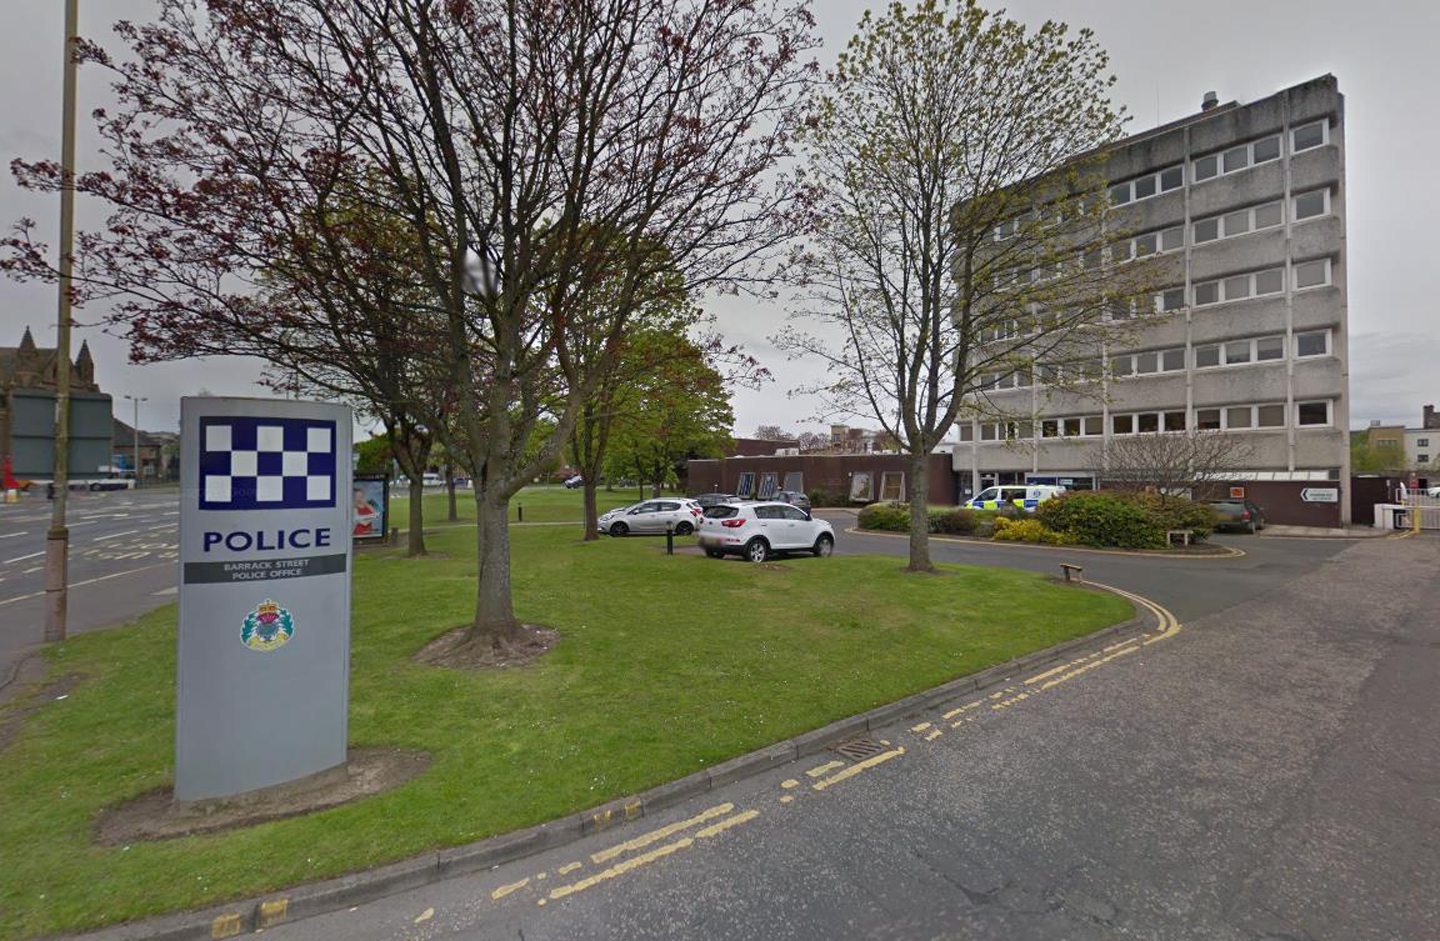 Two police station in Tayside are affected by the faulty concrete, including Perth police station